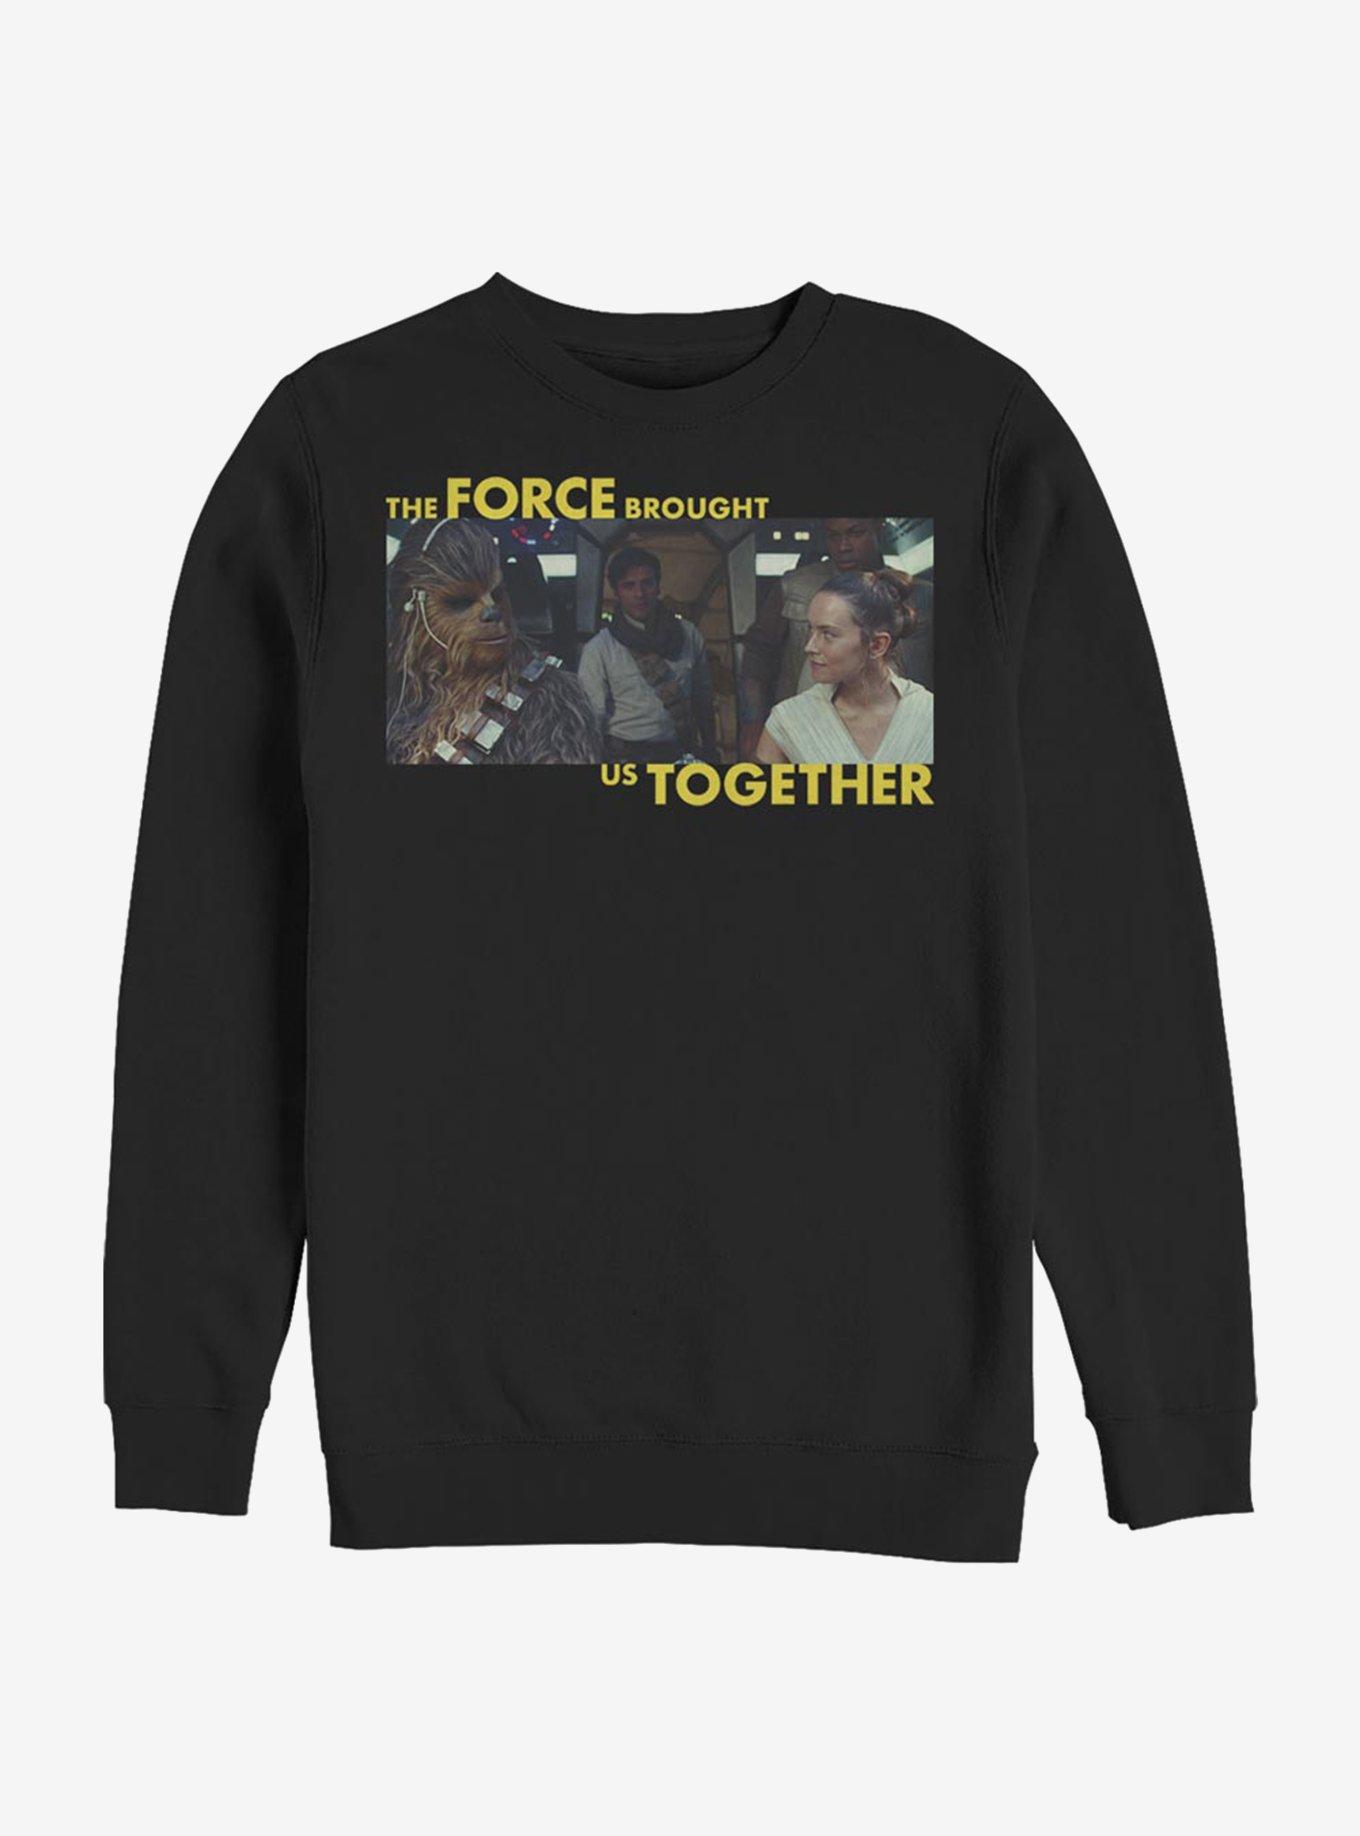 Star Wars: The Rise Of Skywalker Will Of The Force Sweatshirt, BLACK, hi-res